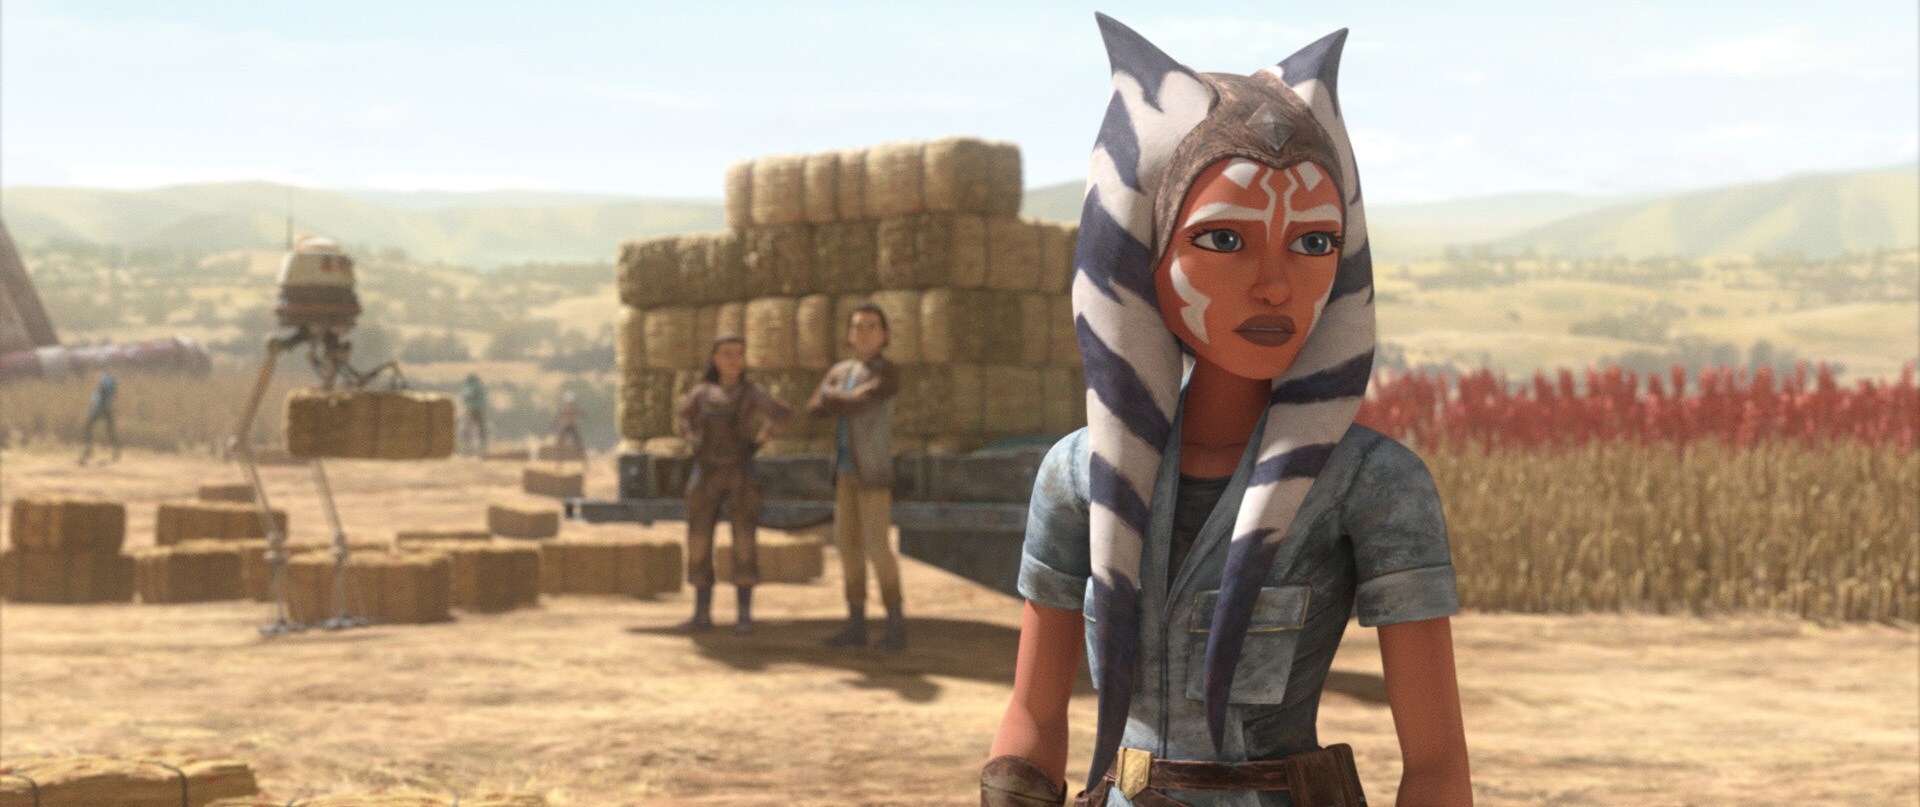 Tano went into hiding following Order 66, living under the name Ashla and working on a farm.